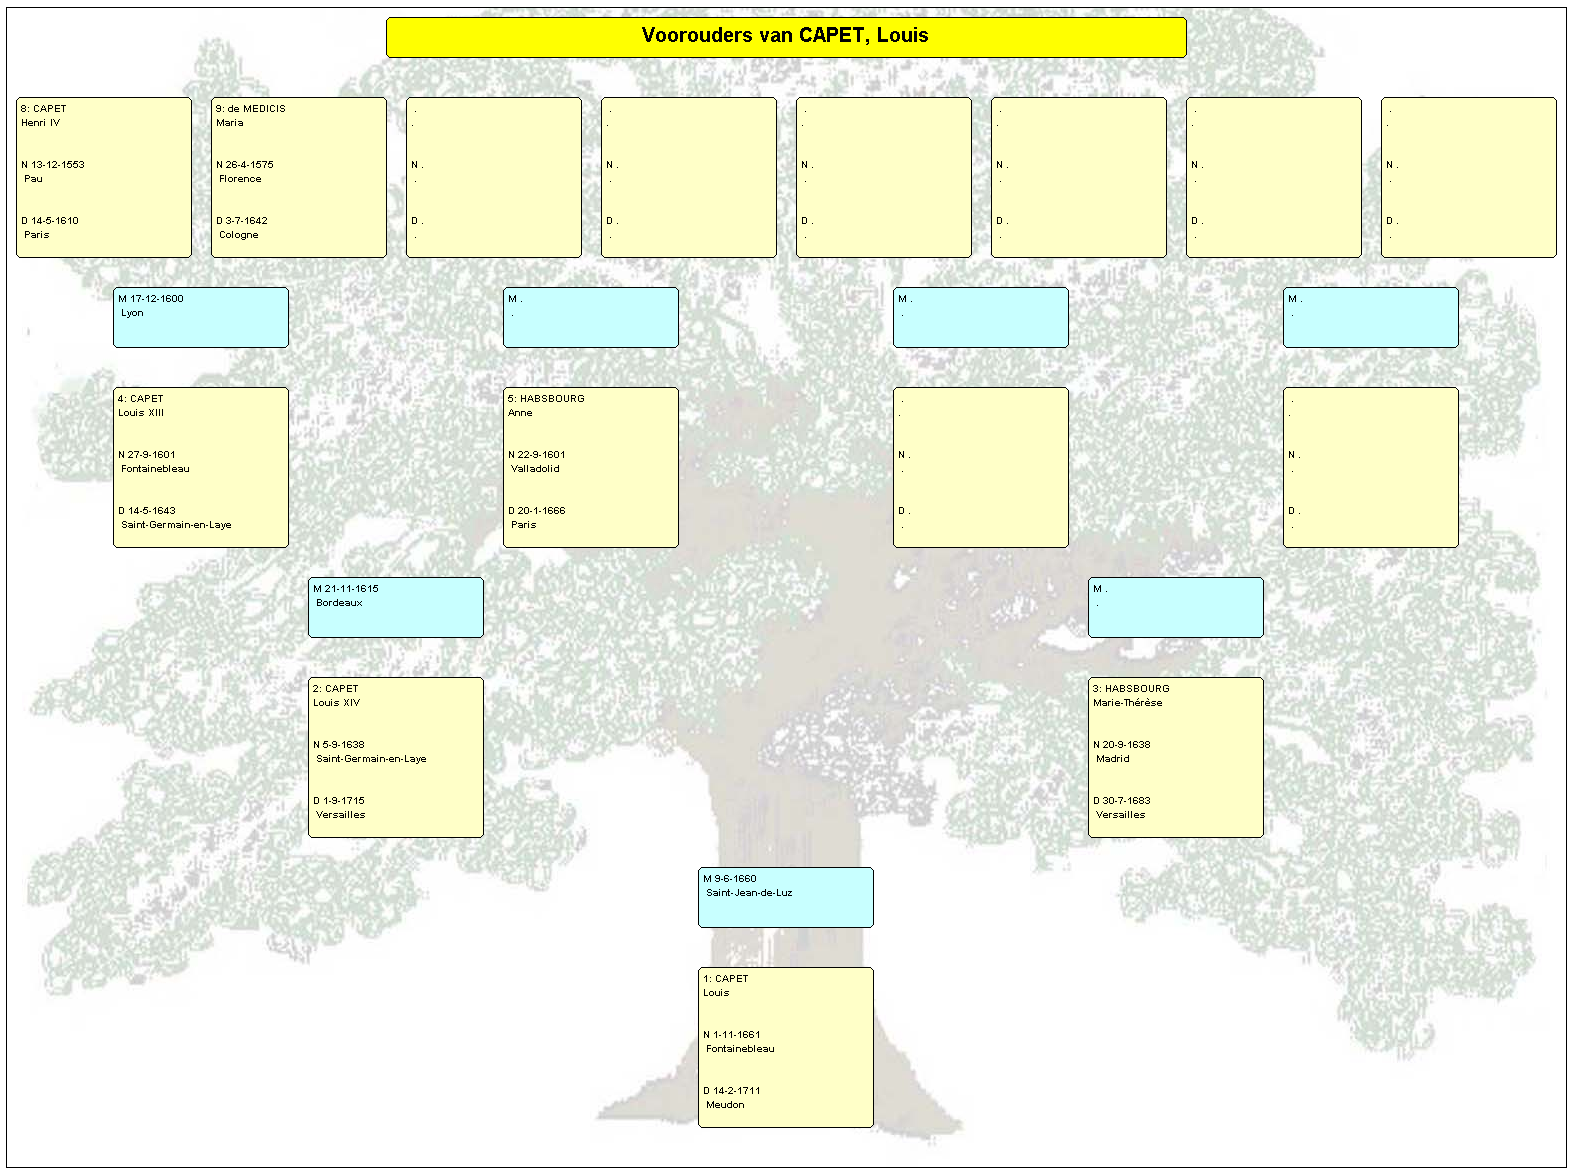 nl-example-reports-tree-graphical-vert-4generations.png